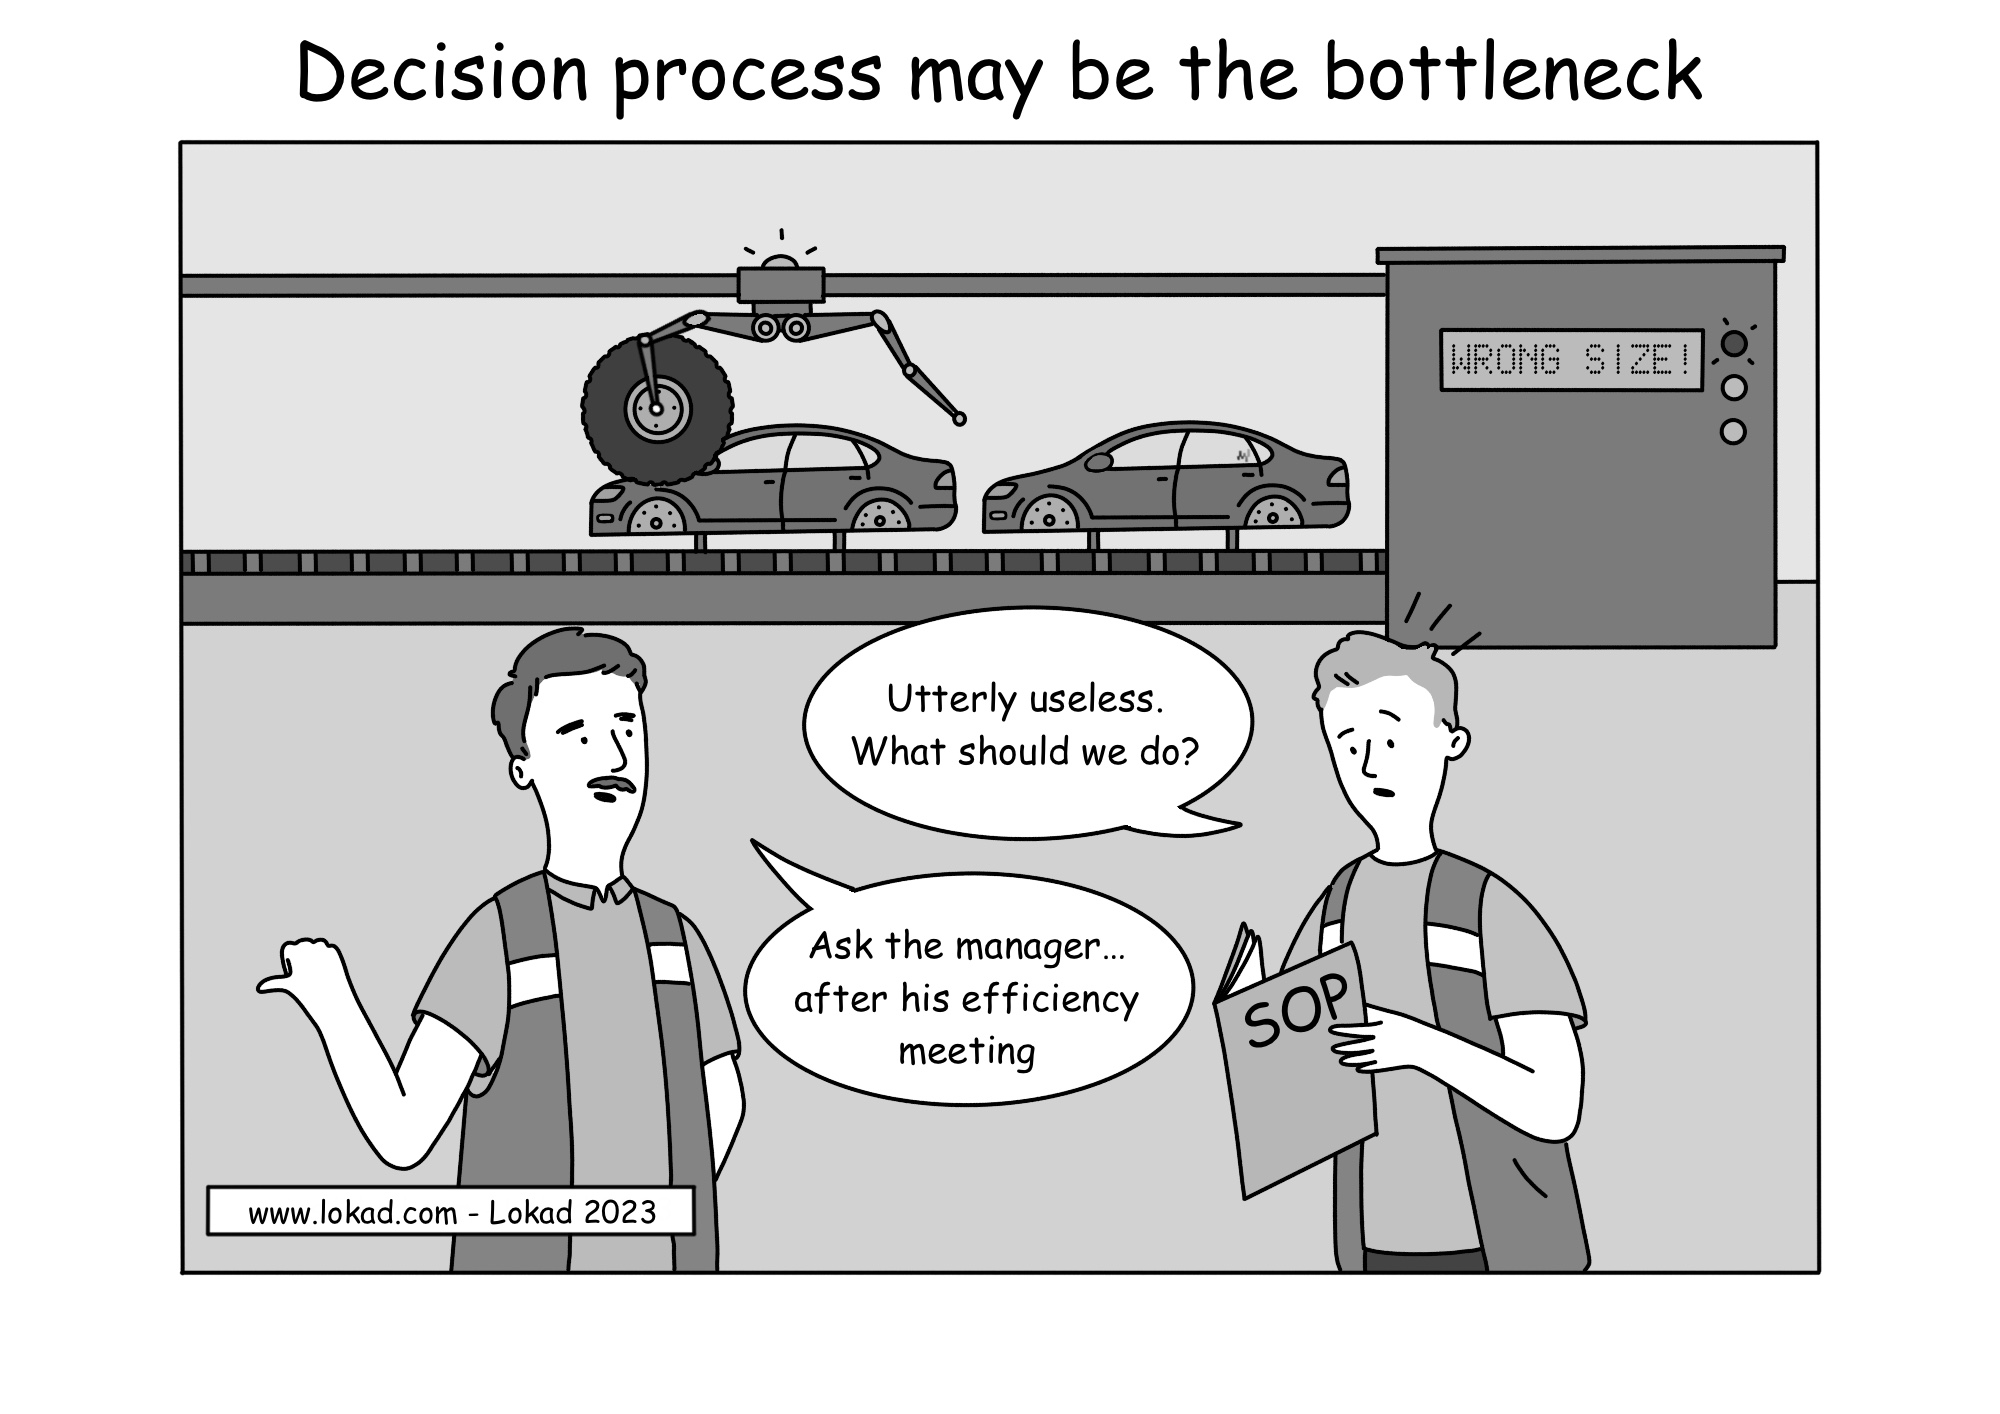 Decision process may be the bottleneck